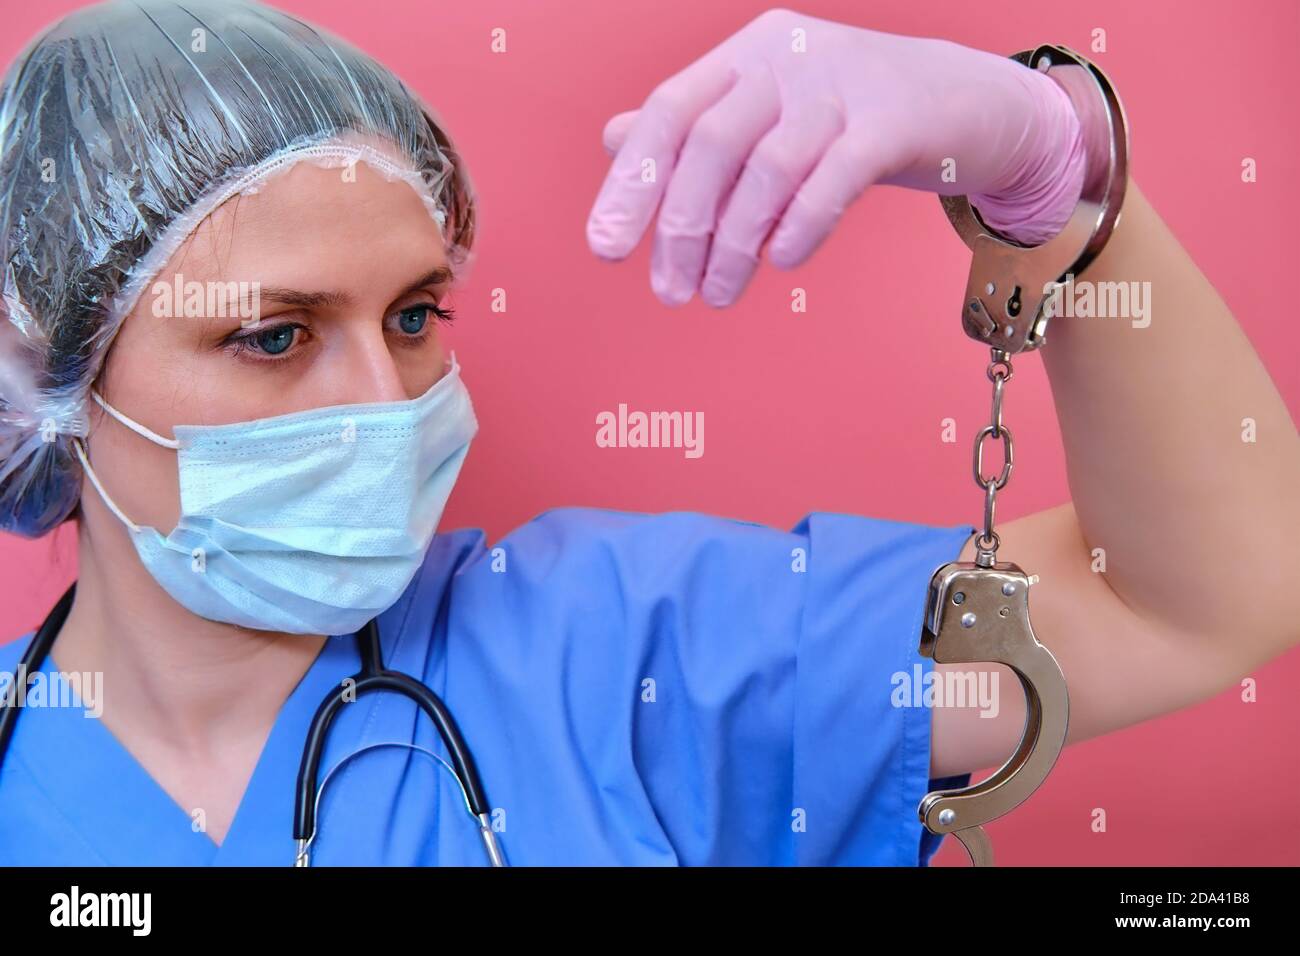 Doctor hands in handcuffs on red background, closeup. Woman hands in pink medical gloves handcuffed, coronavirus quarantine concept. Stock Photo